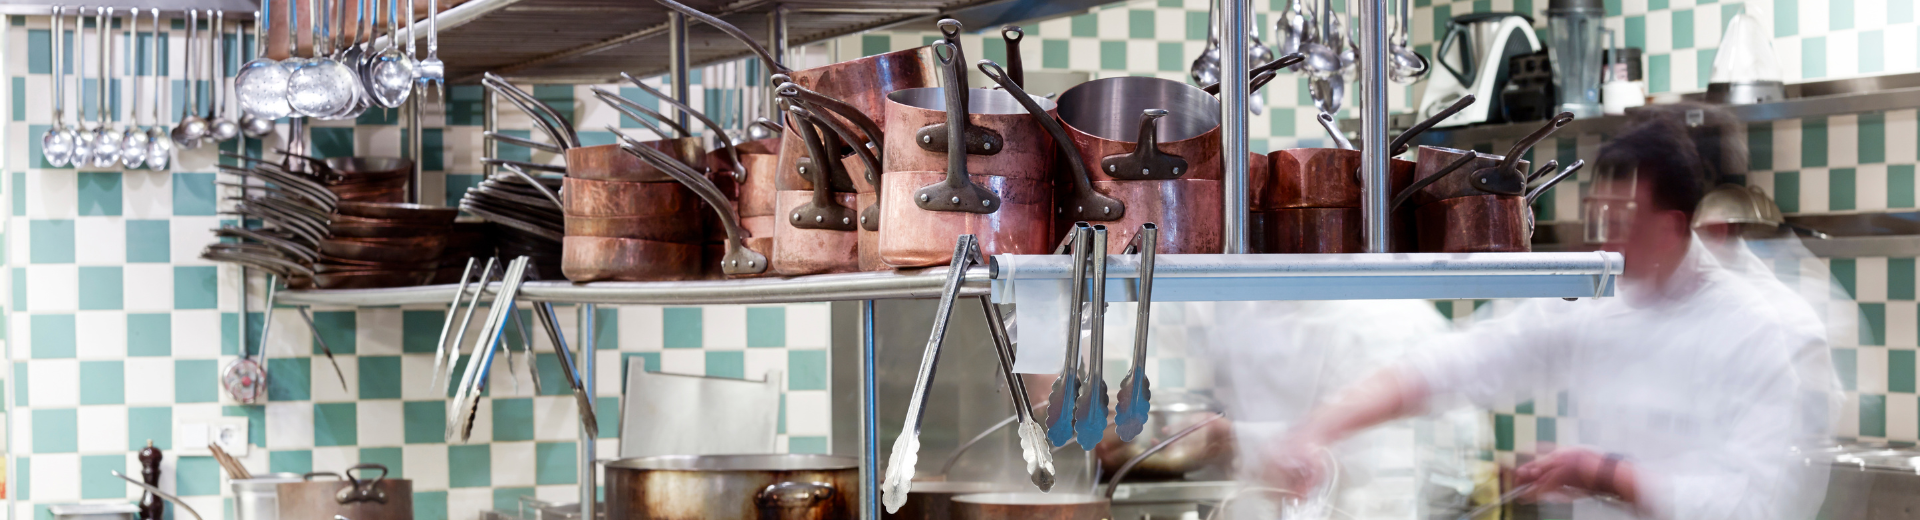 Copper pots and pans in busy restaurant kitchen.